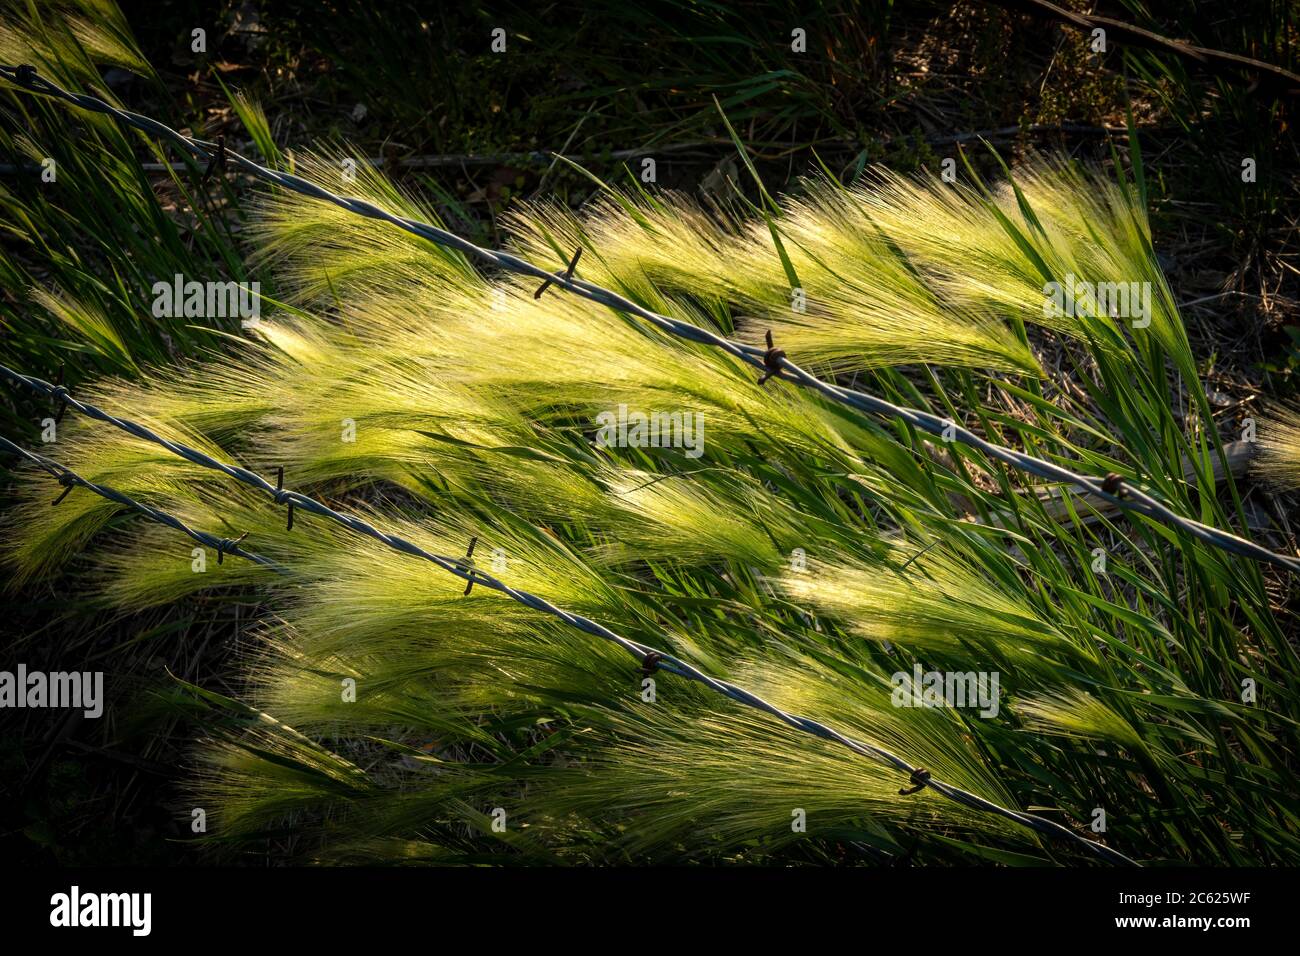 Tall grass on edge of farm blowing in the wind with barbed wire. Stock Photo